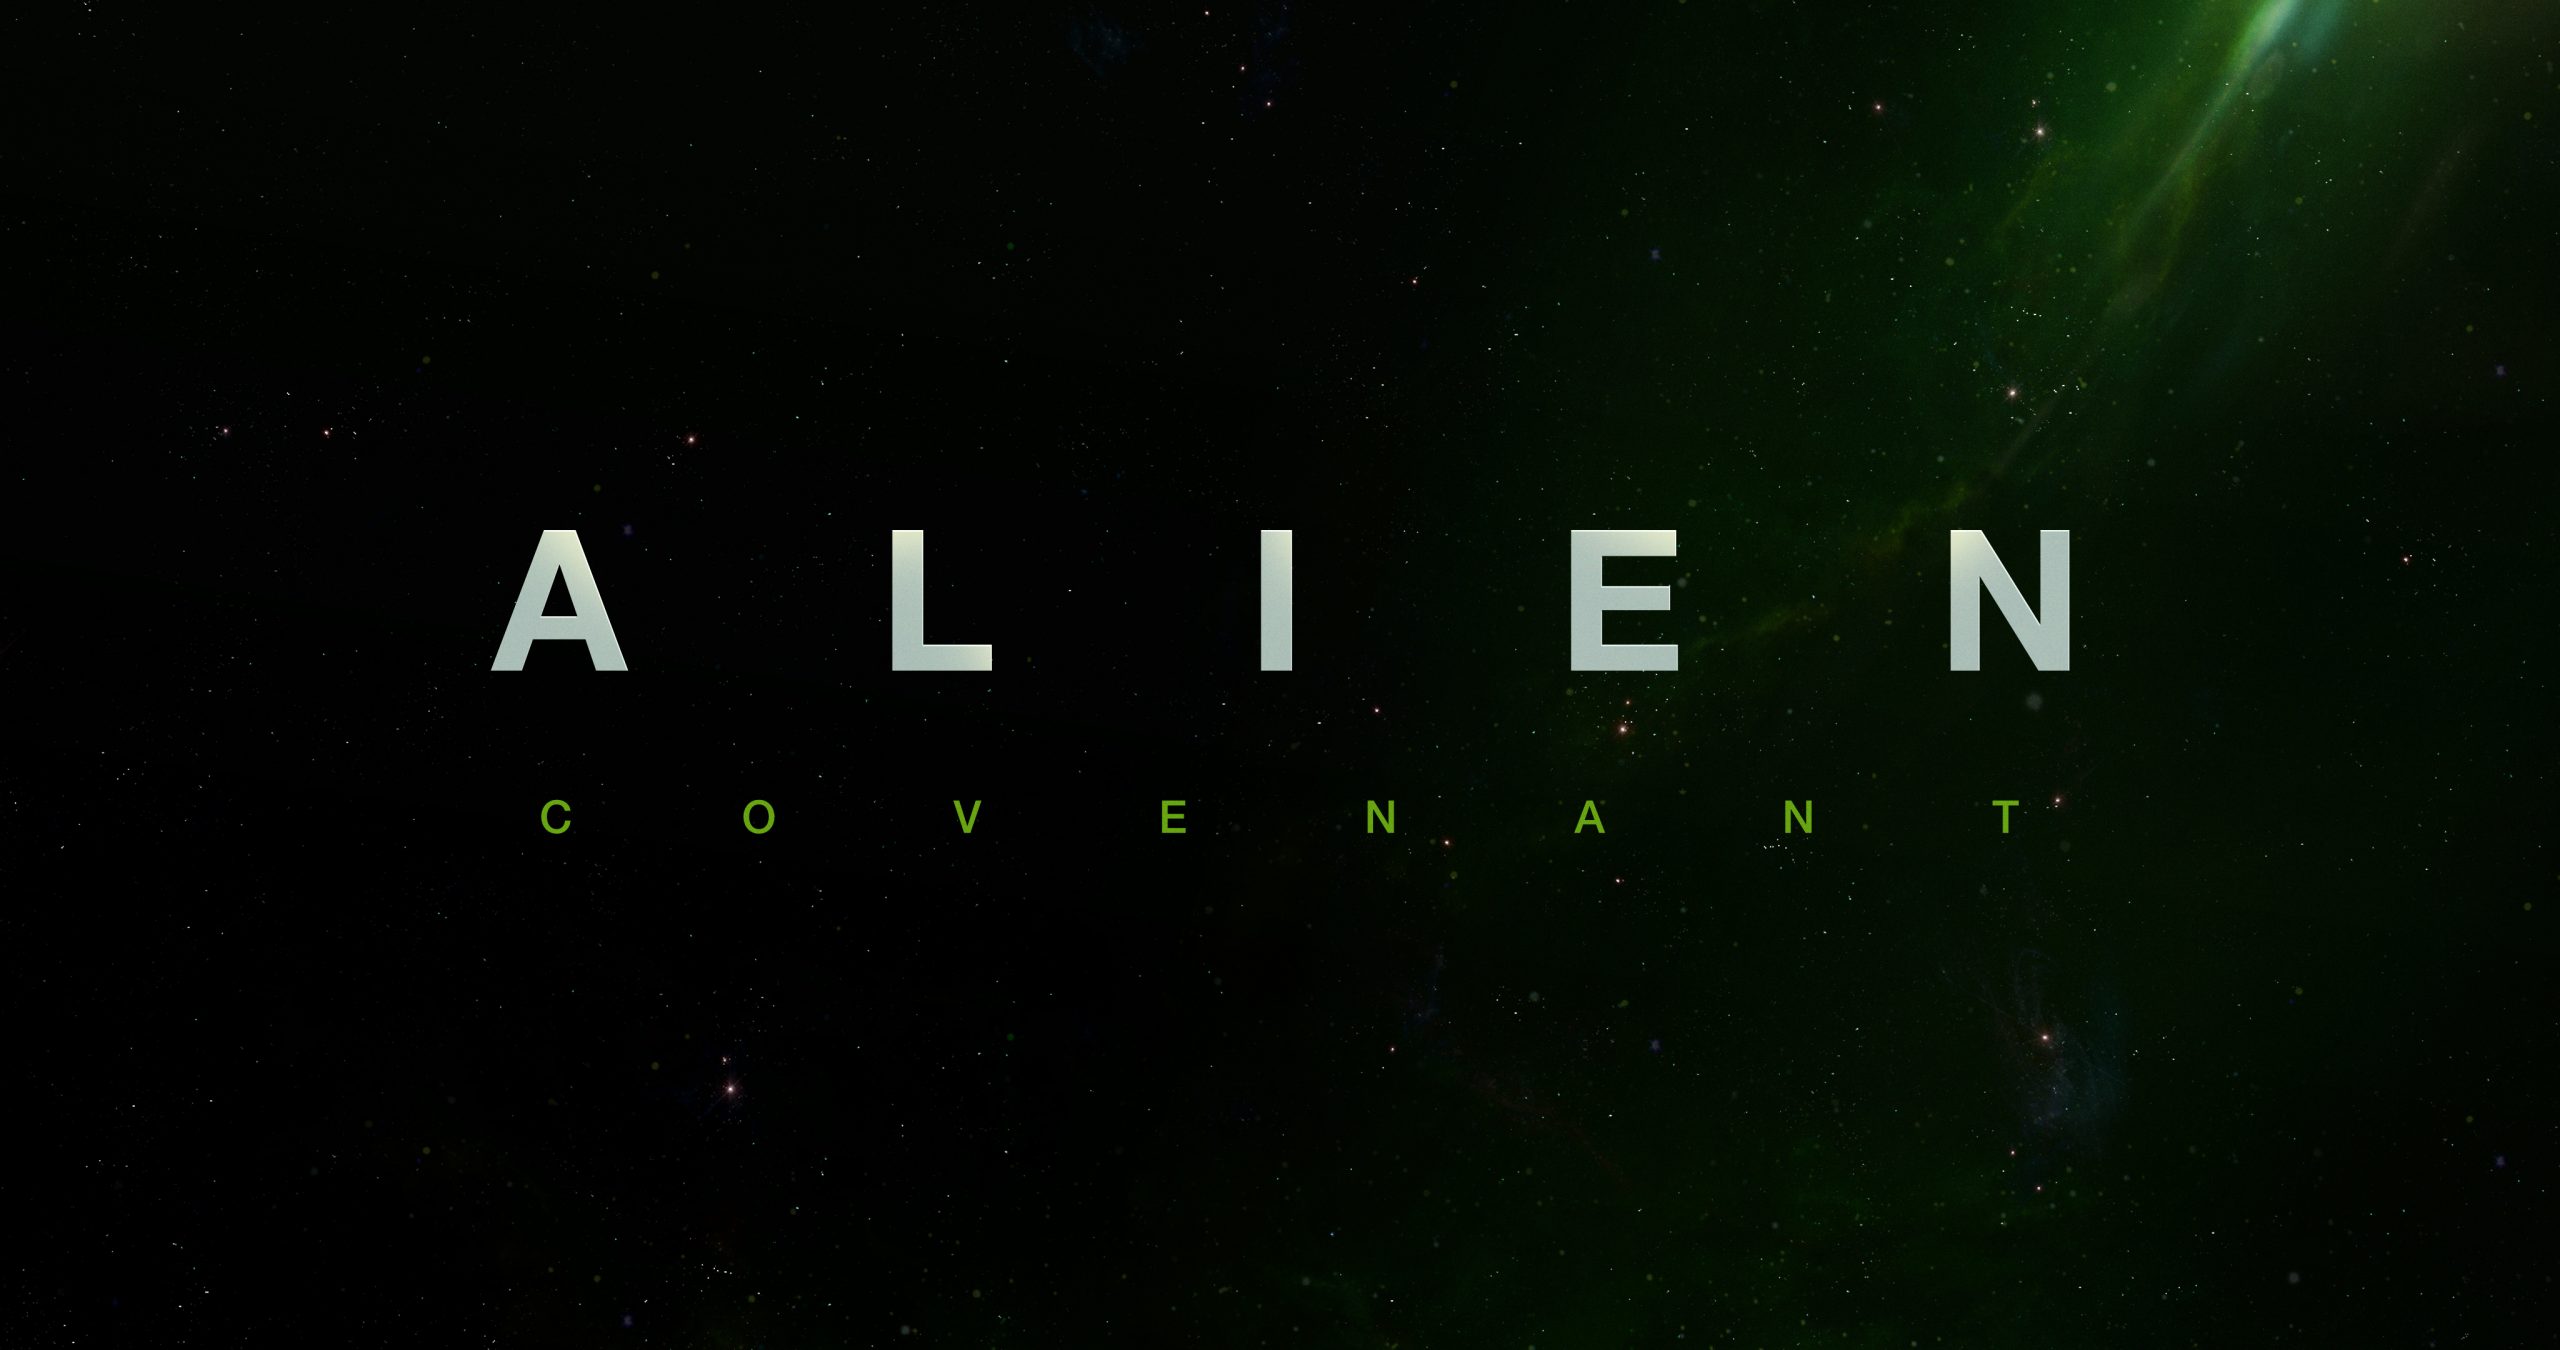 Alien: Covenant (Prometheus 2) FAQ - Everything We Know So Far [Updated]